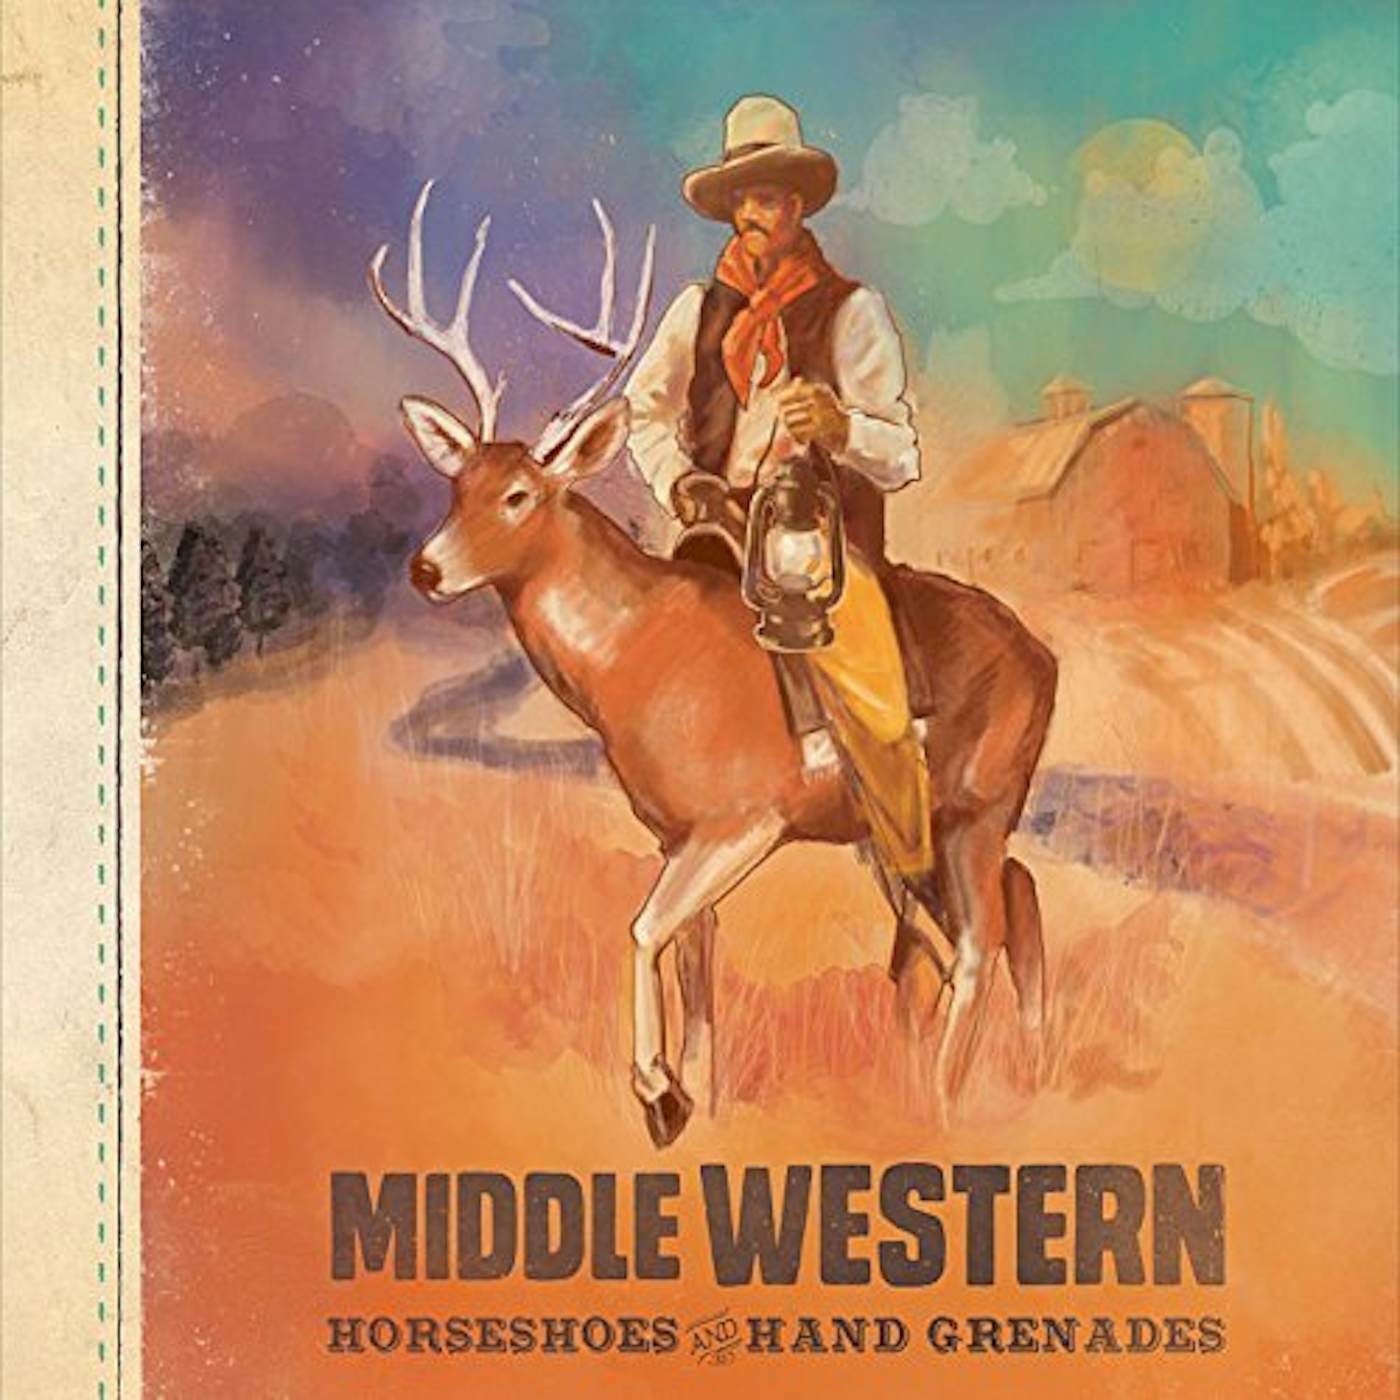 Horseshoes & Hand Grenades MIDDLE WESTERN CD